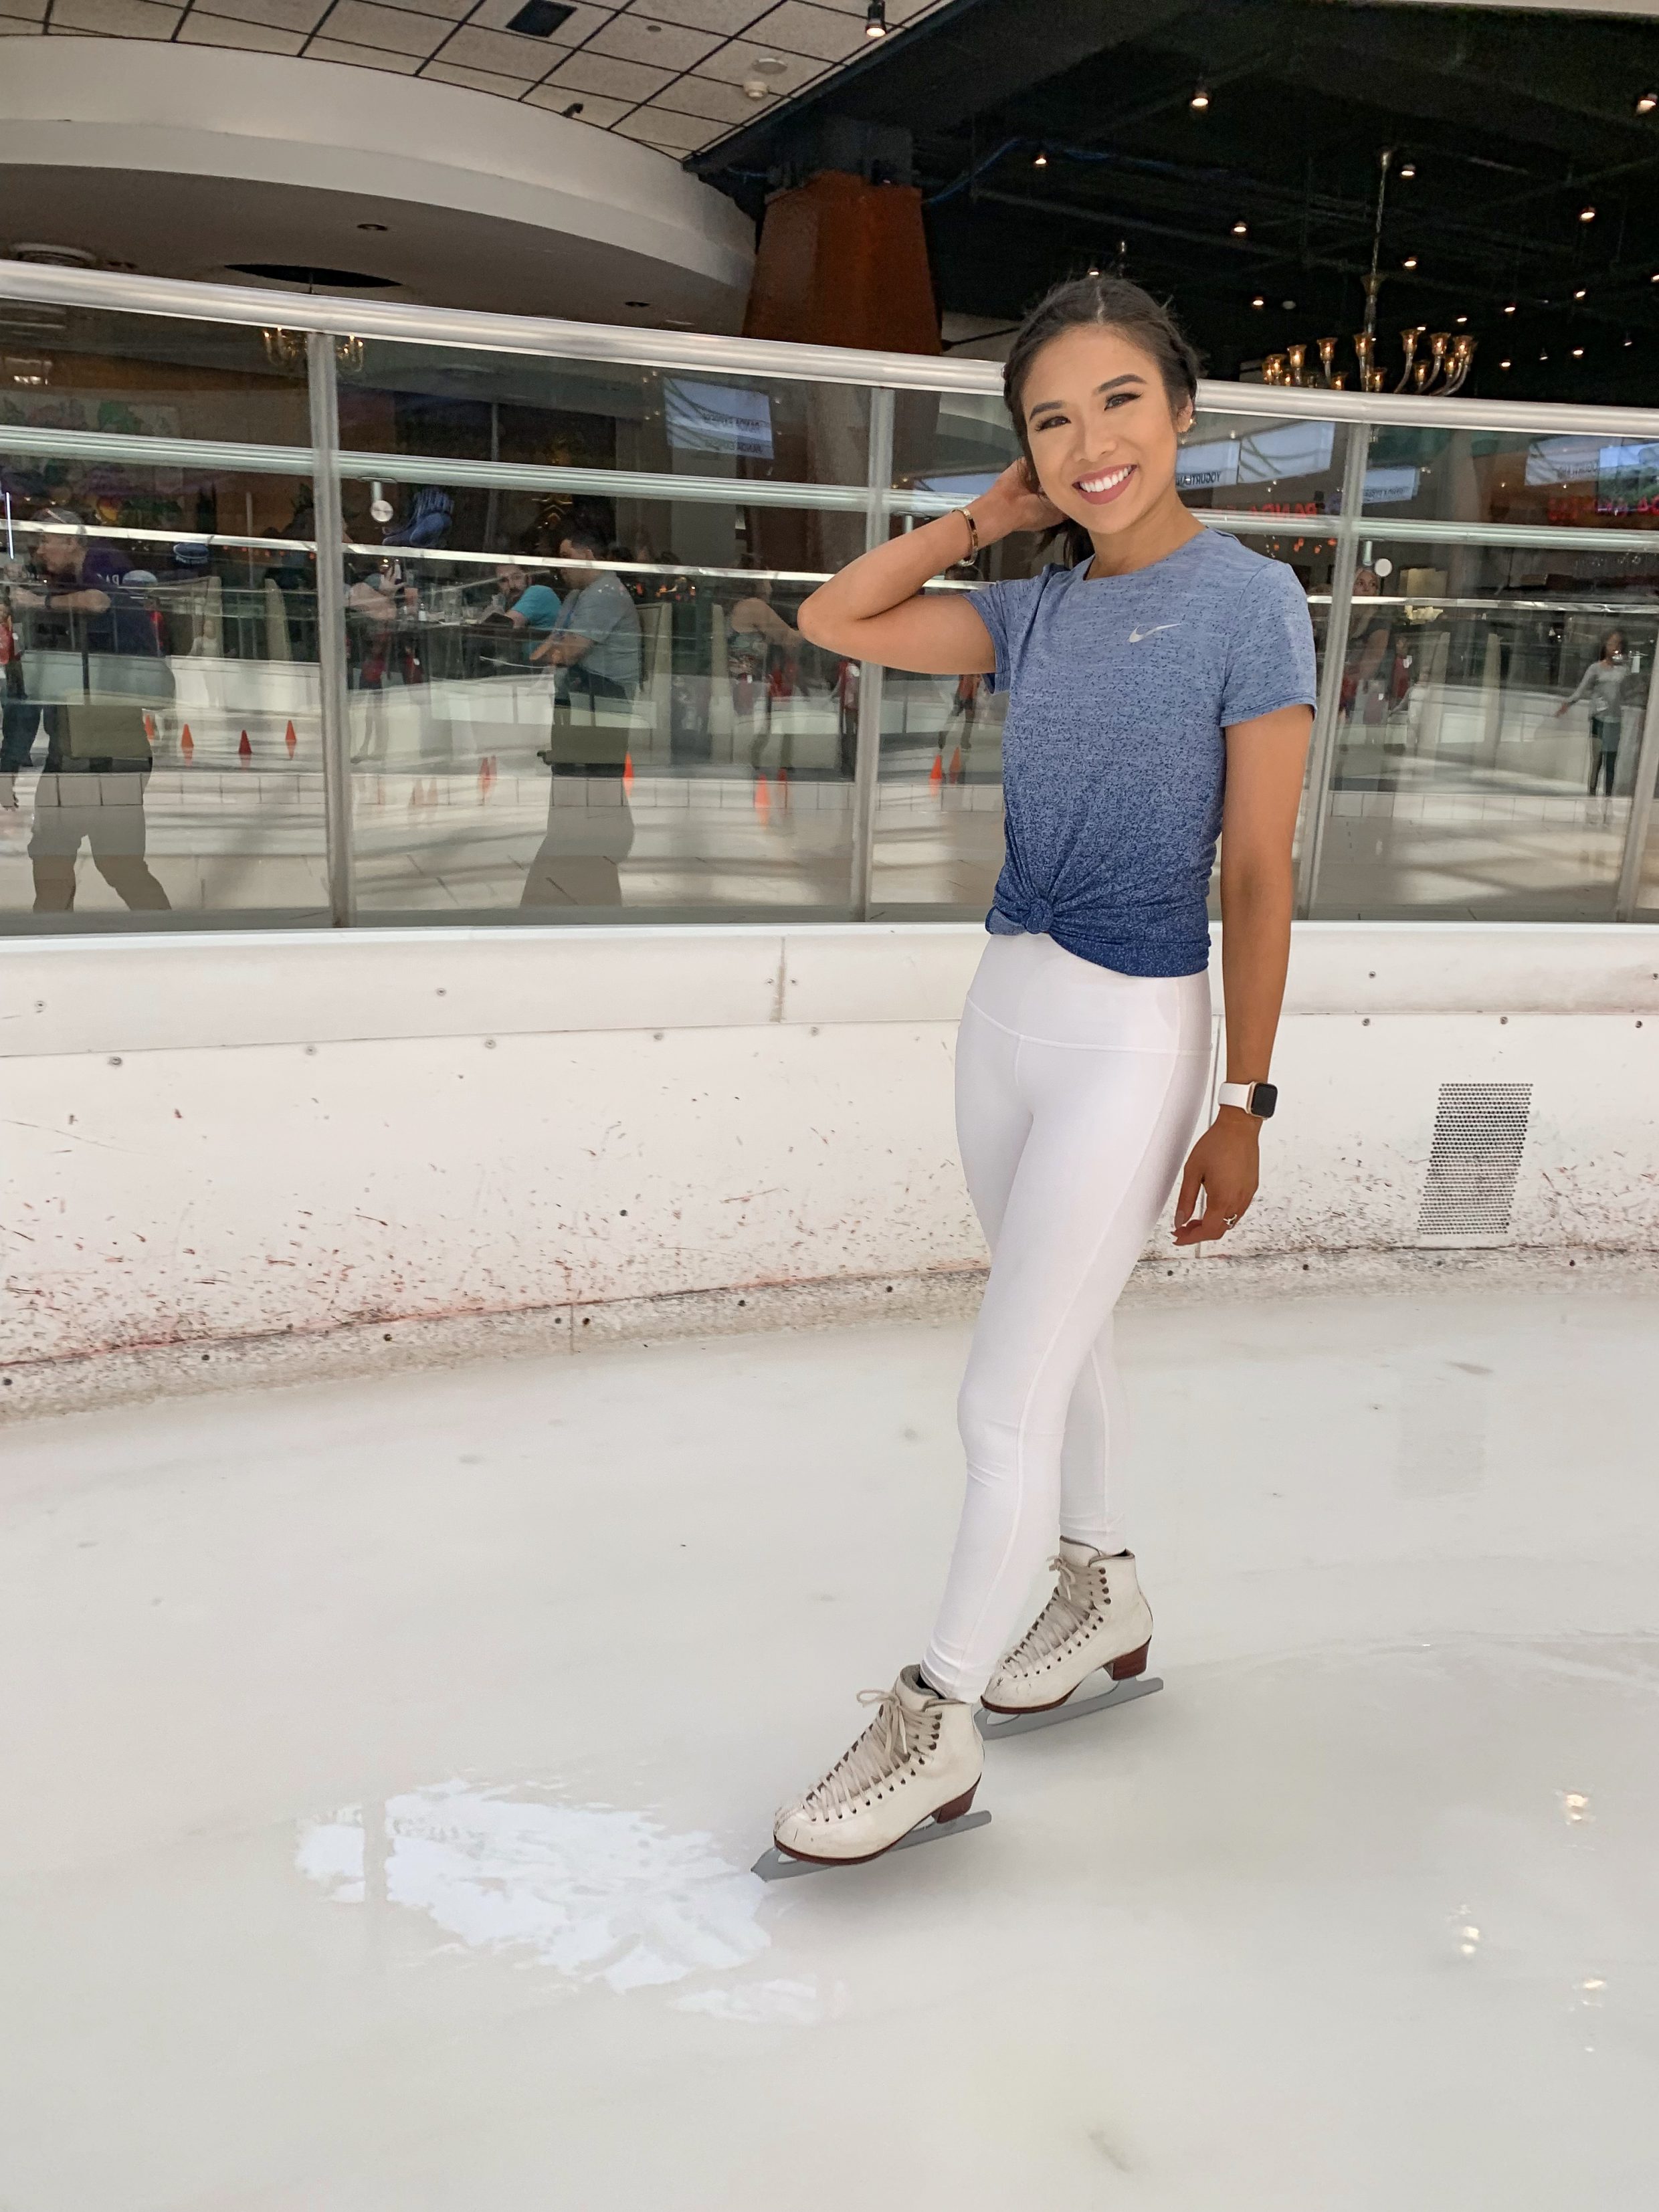 Petite blogger wears an Ice skating outfit featuring Nike blue dri-fit shirt and Lululemon white high waisted leggings